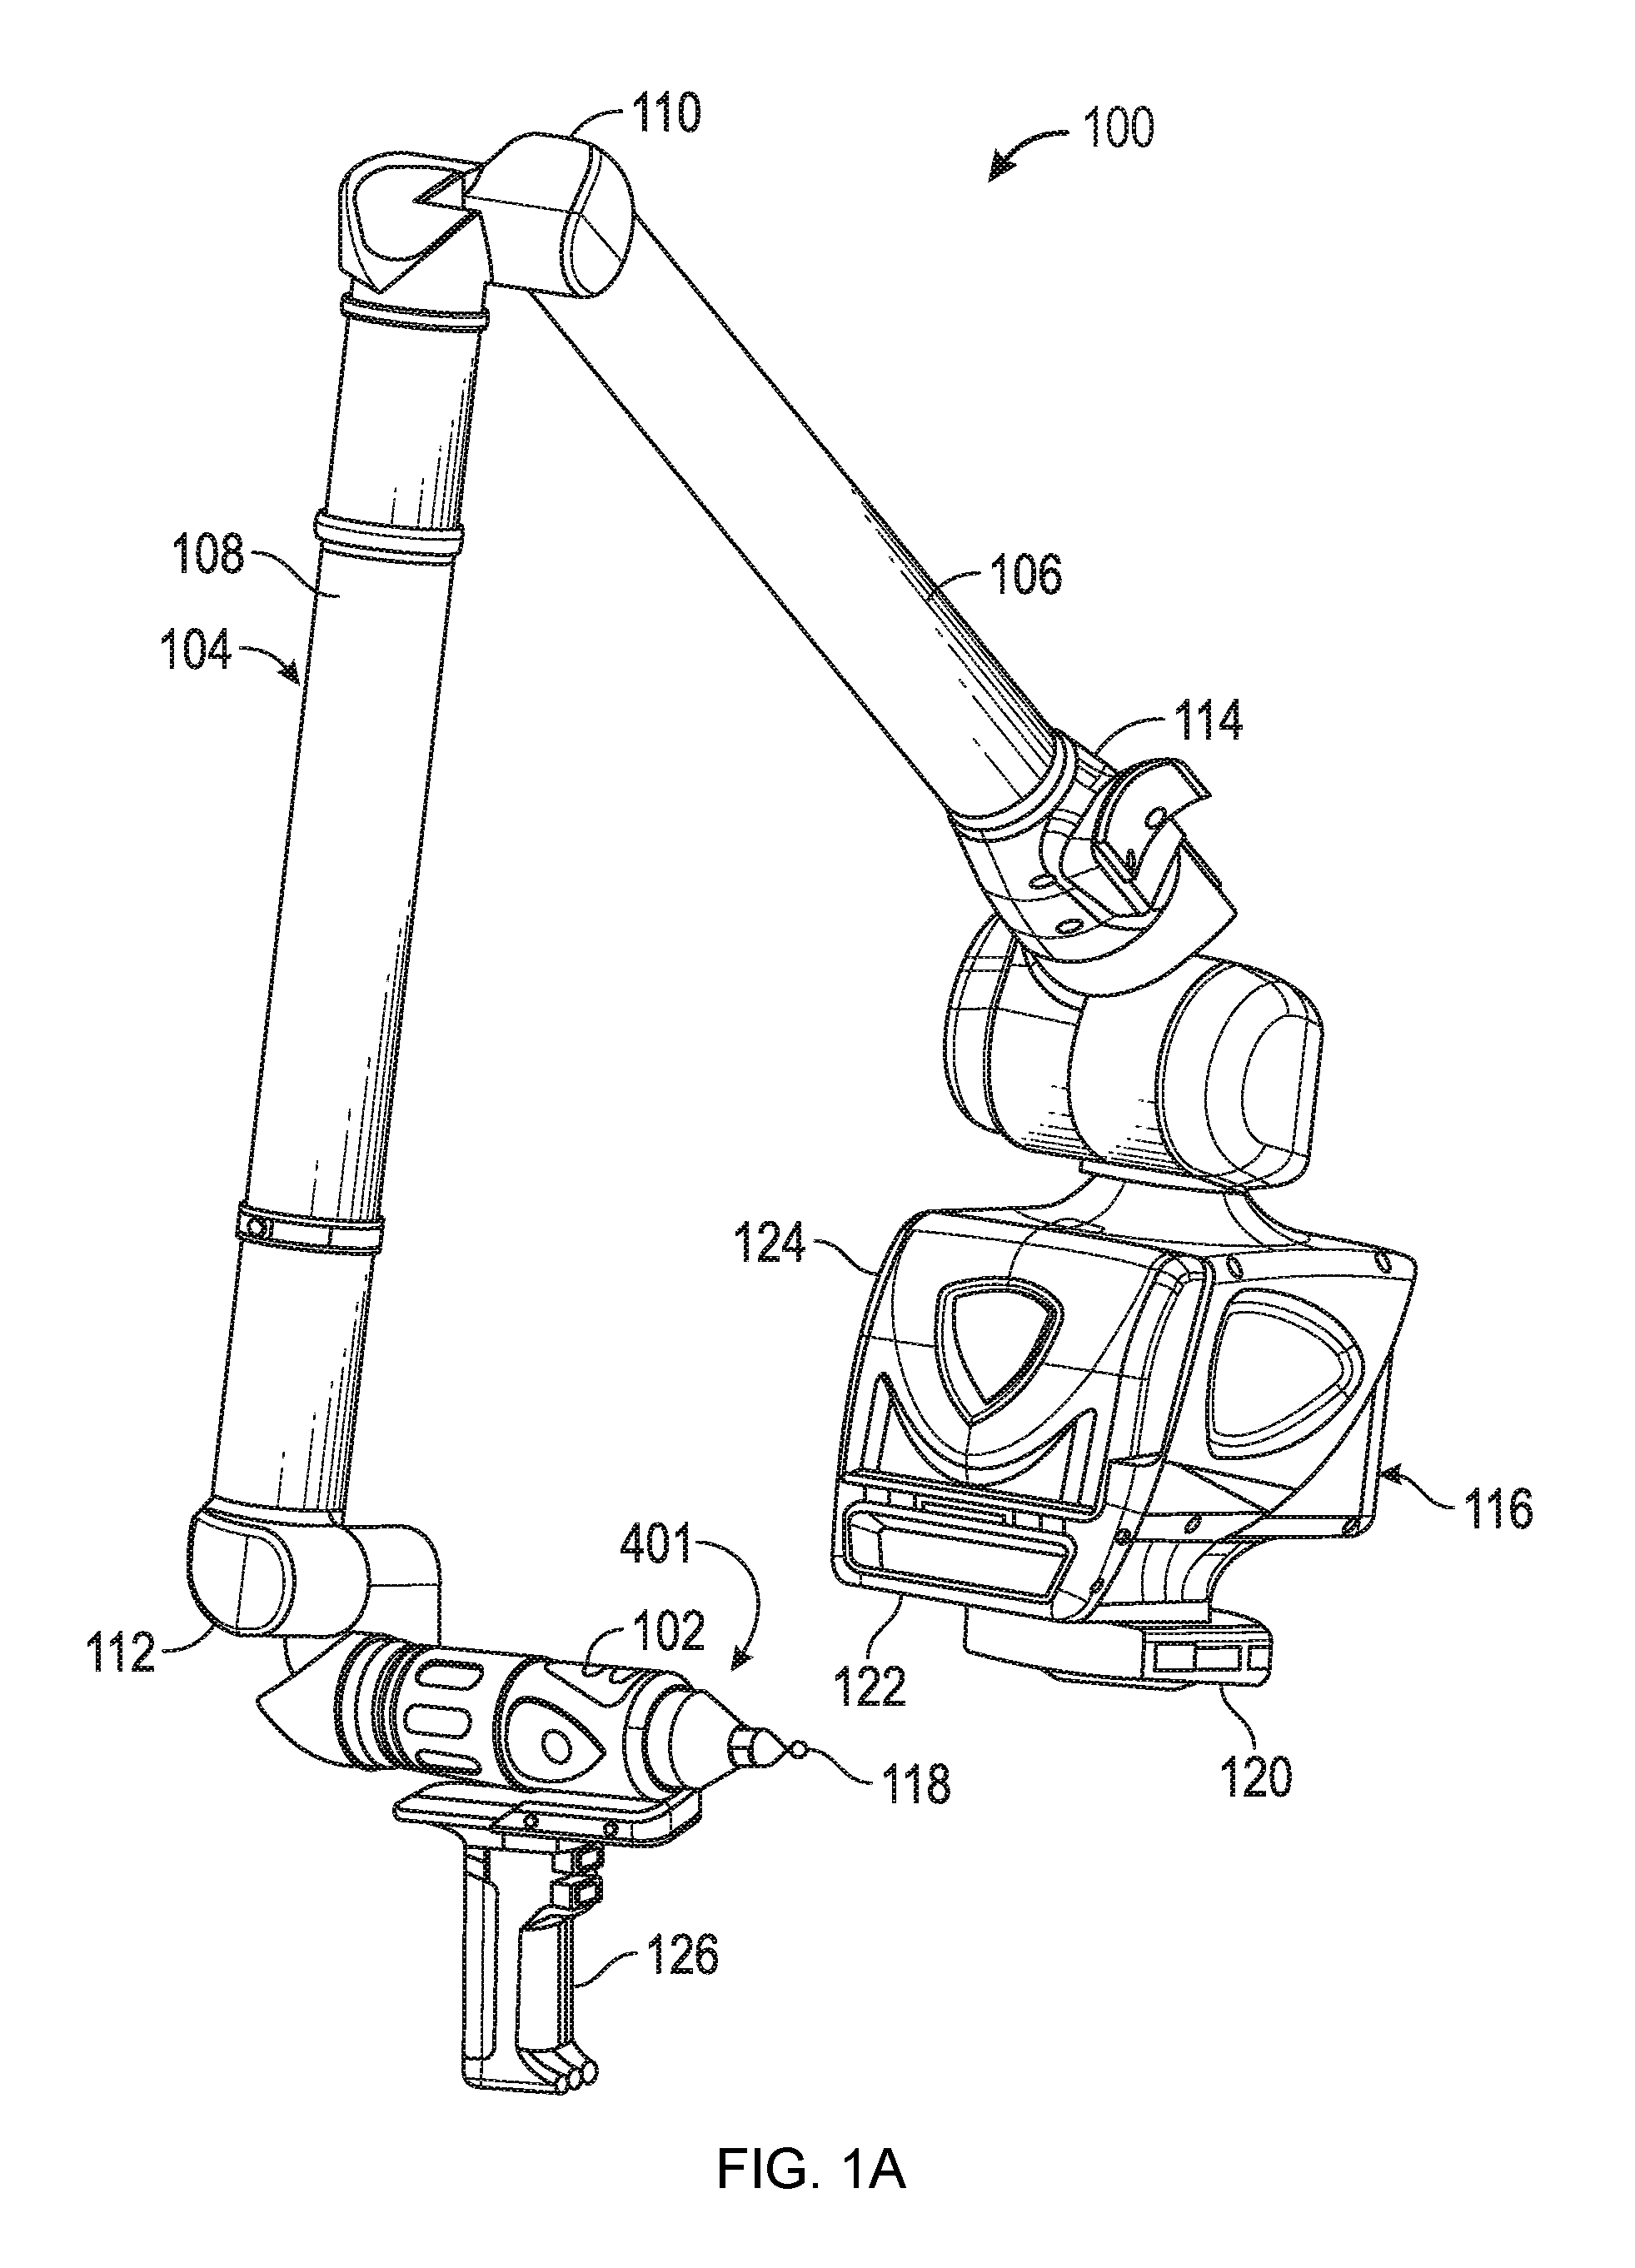 Two-camera triangulation scanner with detachable coupling mechanism